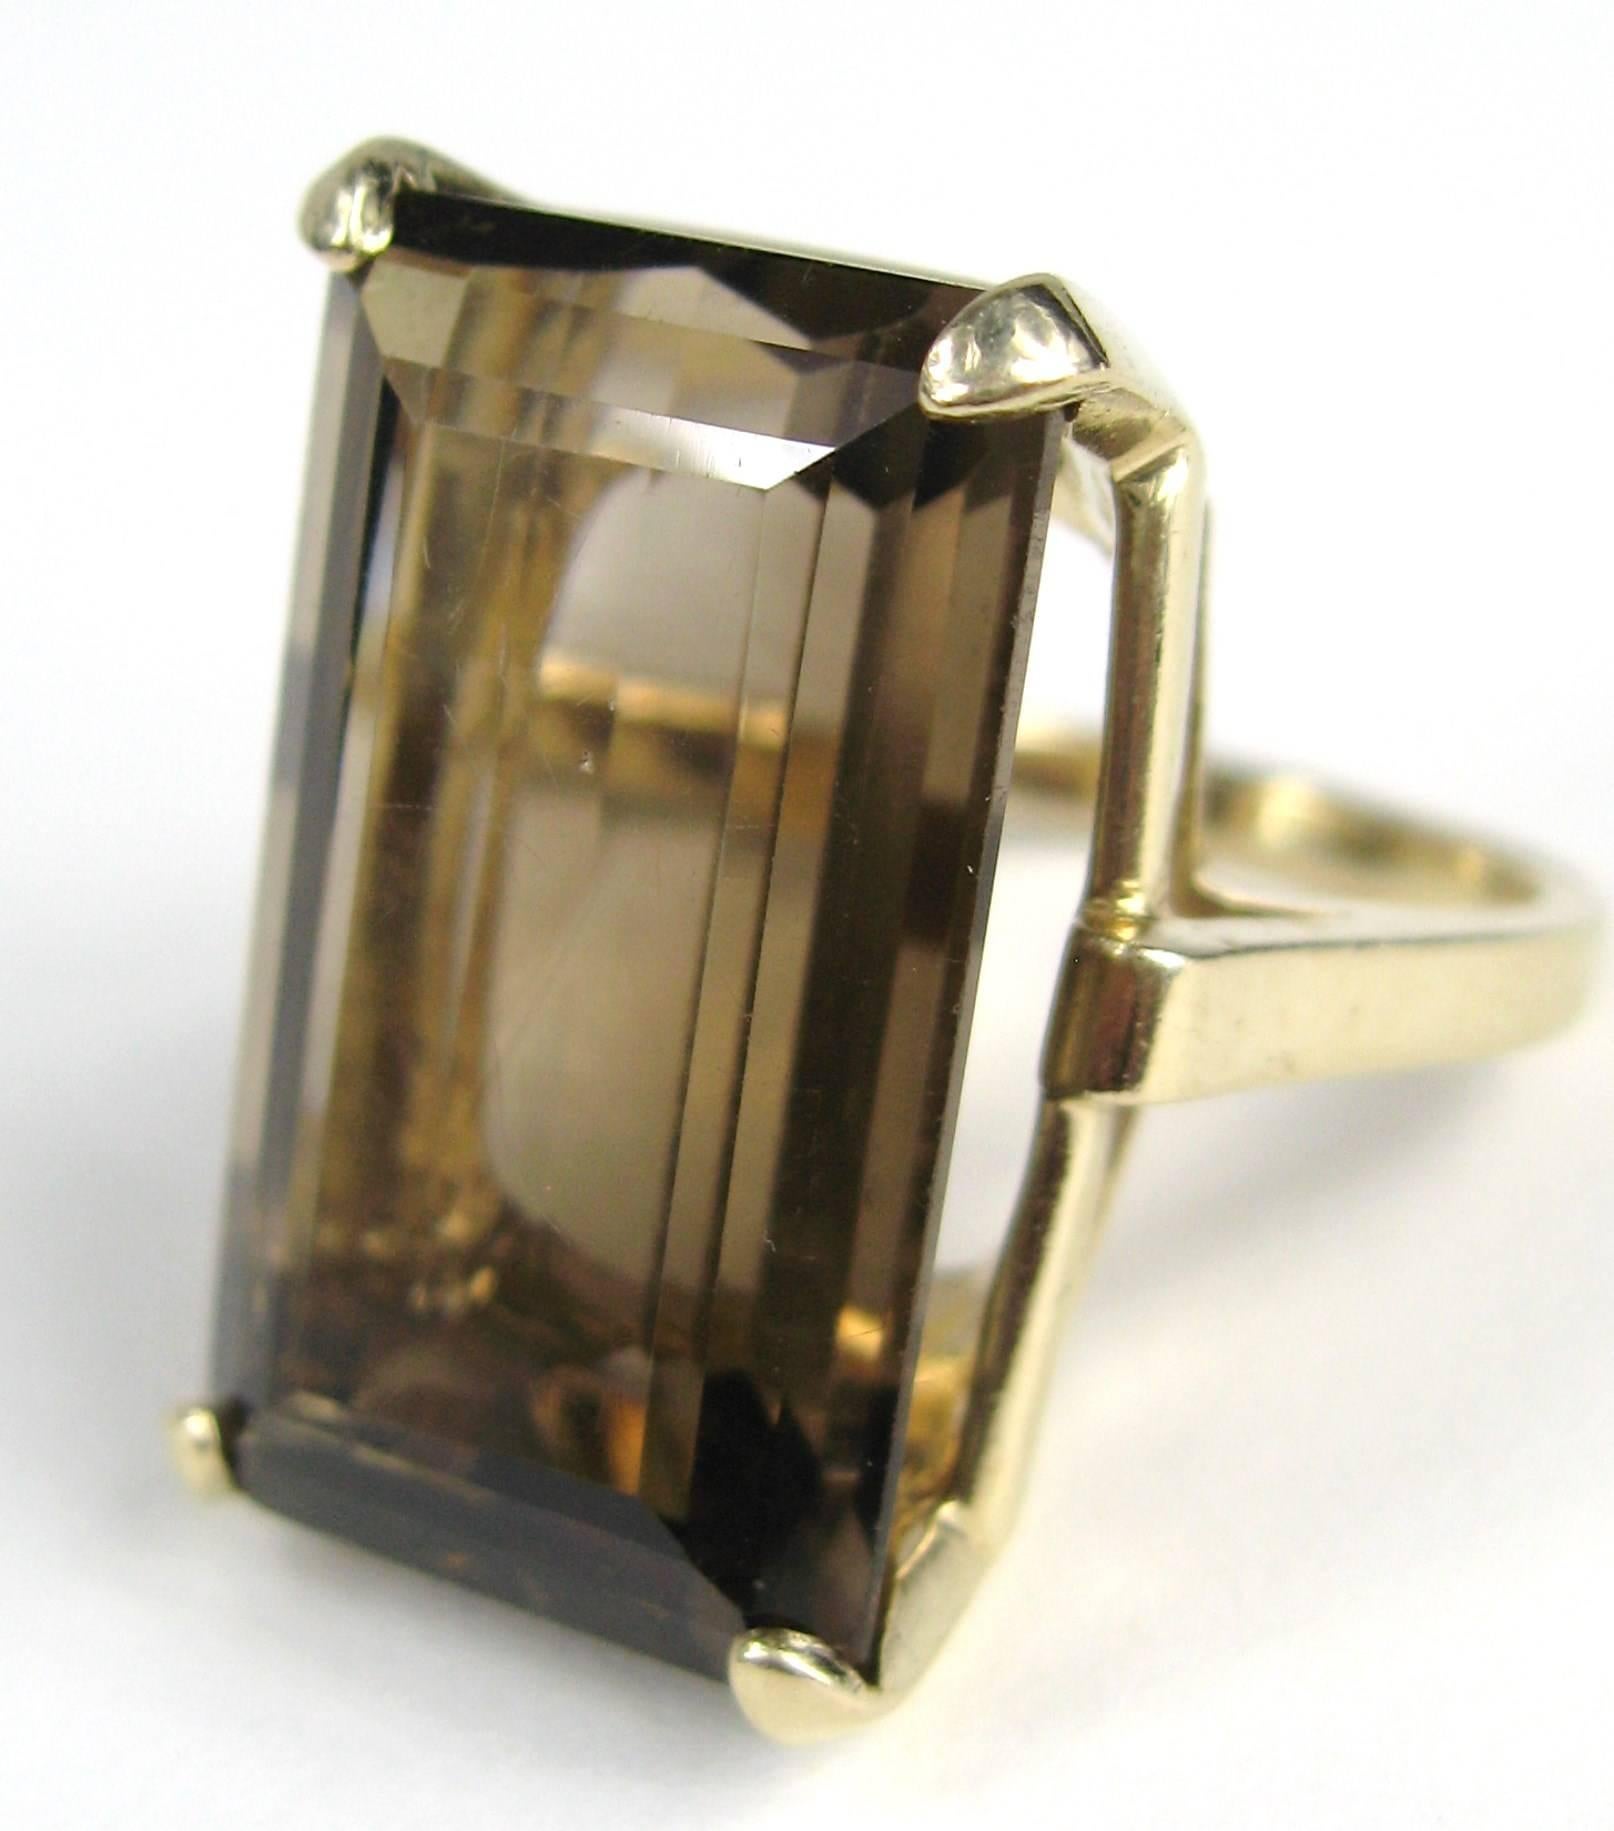 Massive Emerald cut Smokey Quartz ring set in 14K gold This is elegant and sophisticated. Ring is a size 8 and can be sized up or down by us or by your jeweler. This is out of a massive collection of Hopi, Zuni, Navajo, Southwestern, sterling